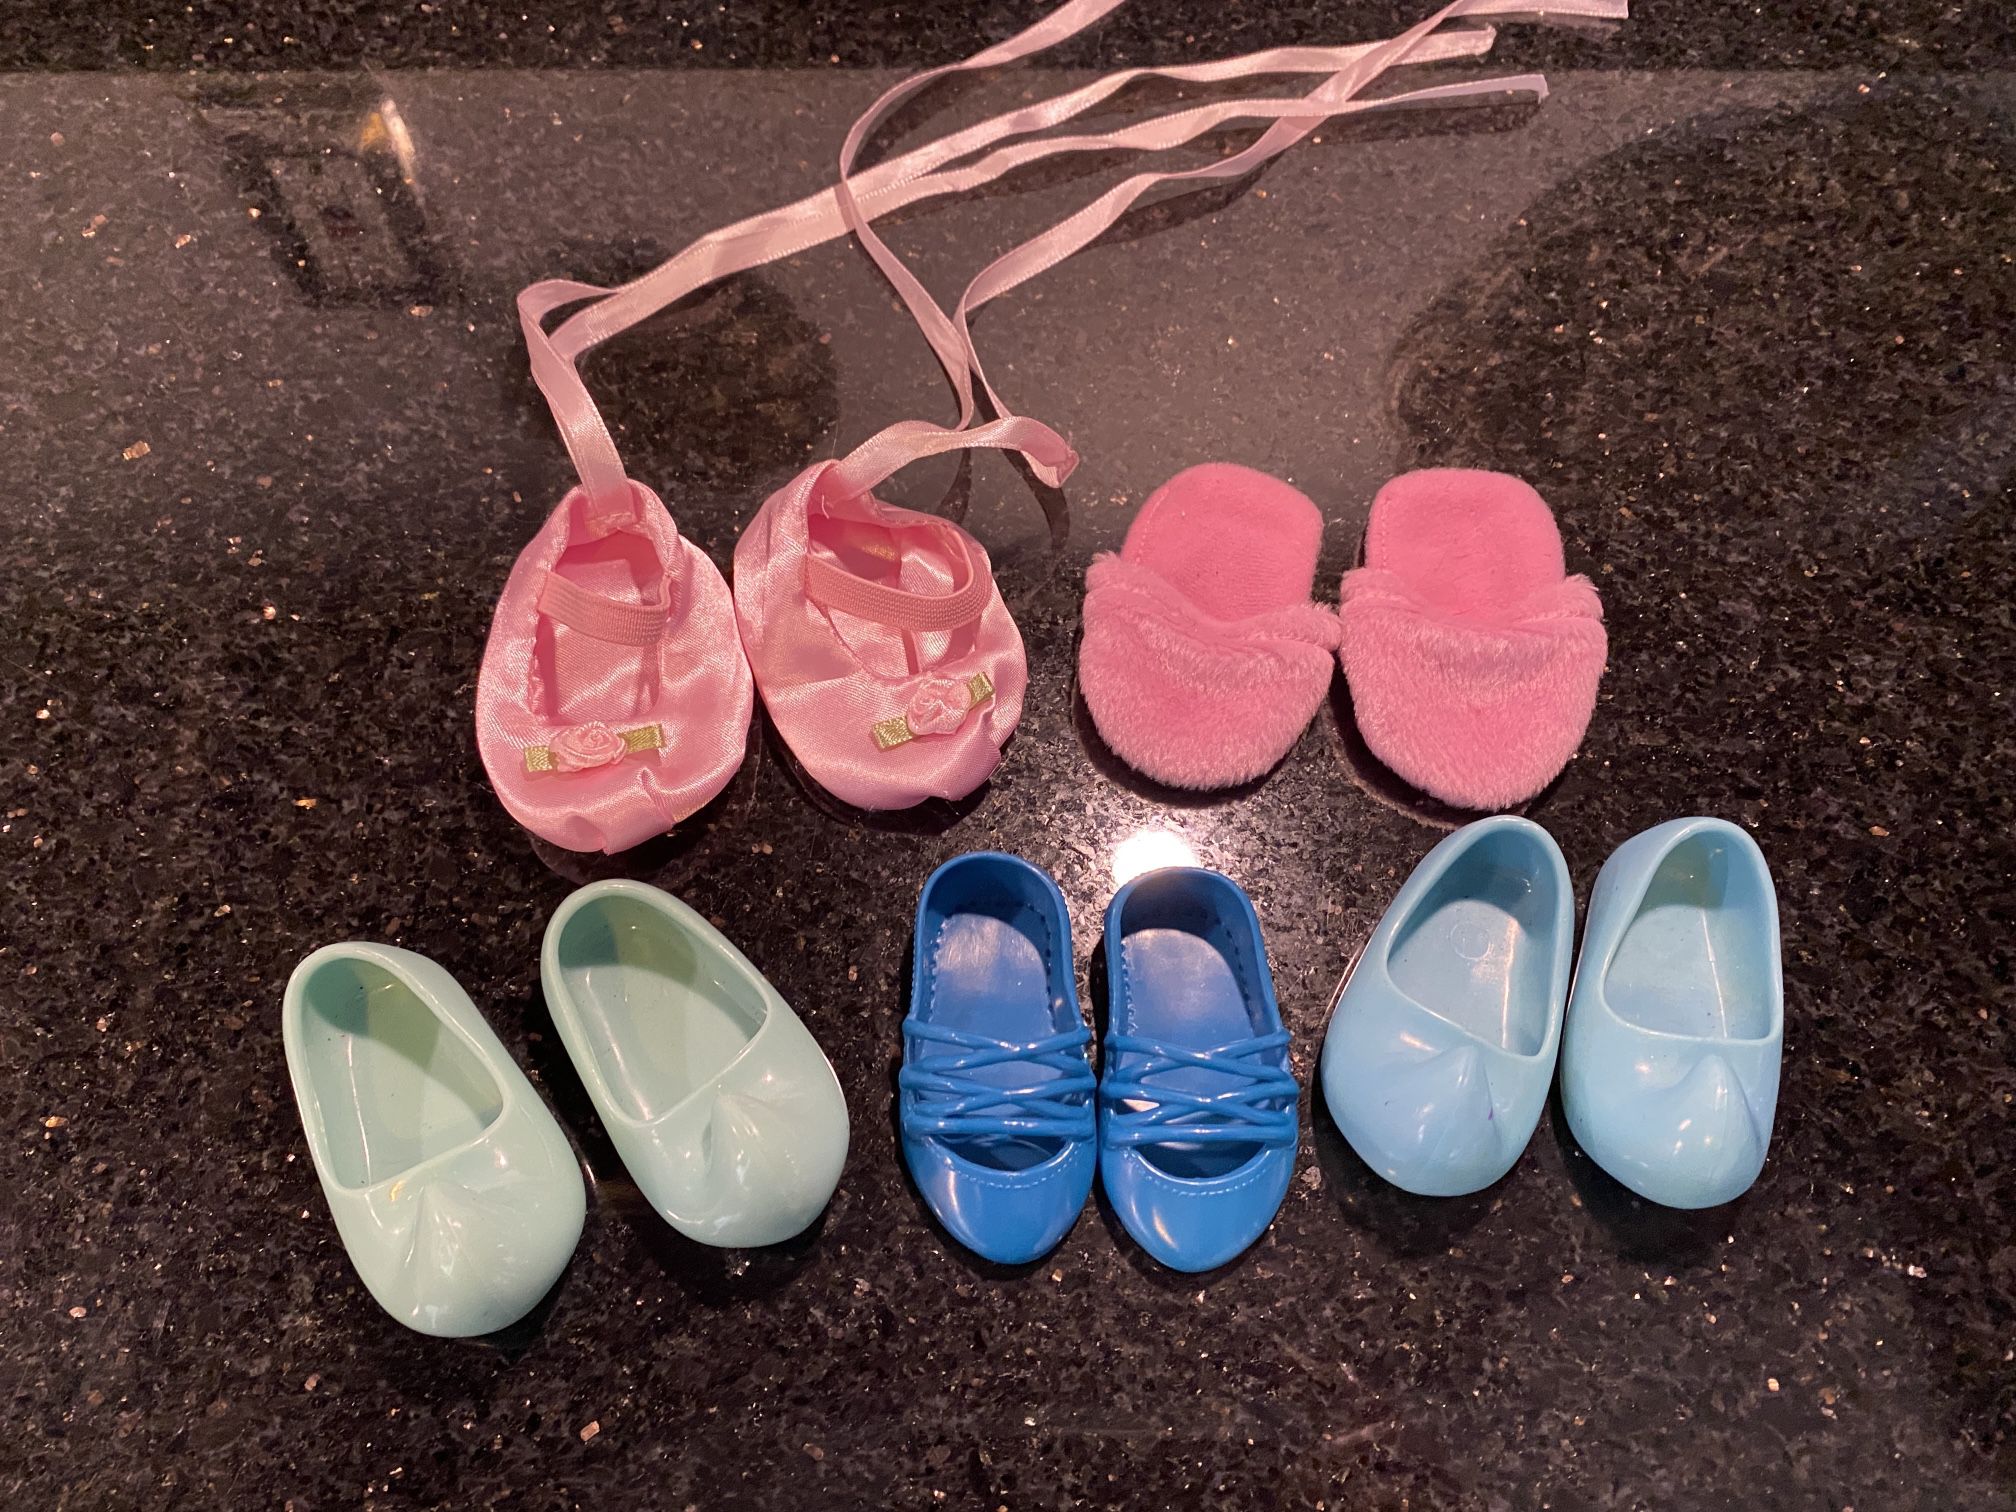 5-pairs Disney My First Princess Toddler Doll Tolly Tots Replacement Large Shoes